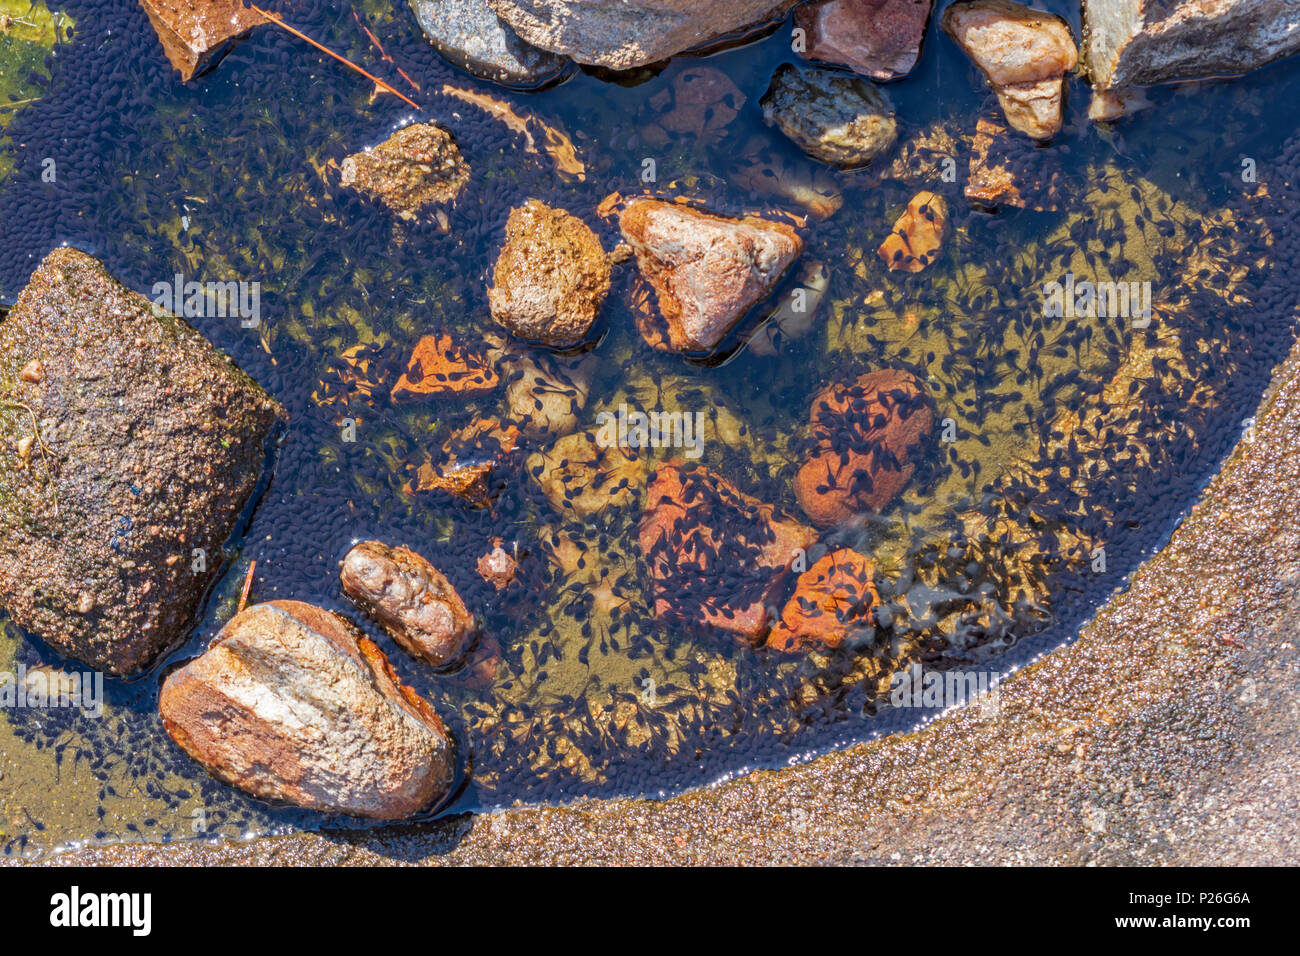 Hundreds of tadpoles or toadpoles collect in one inch of rainwater in solid rock, Castle Rock Colorado US. Eggs most likely from toad- Woodhouse Toad. Stock Photo